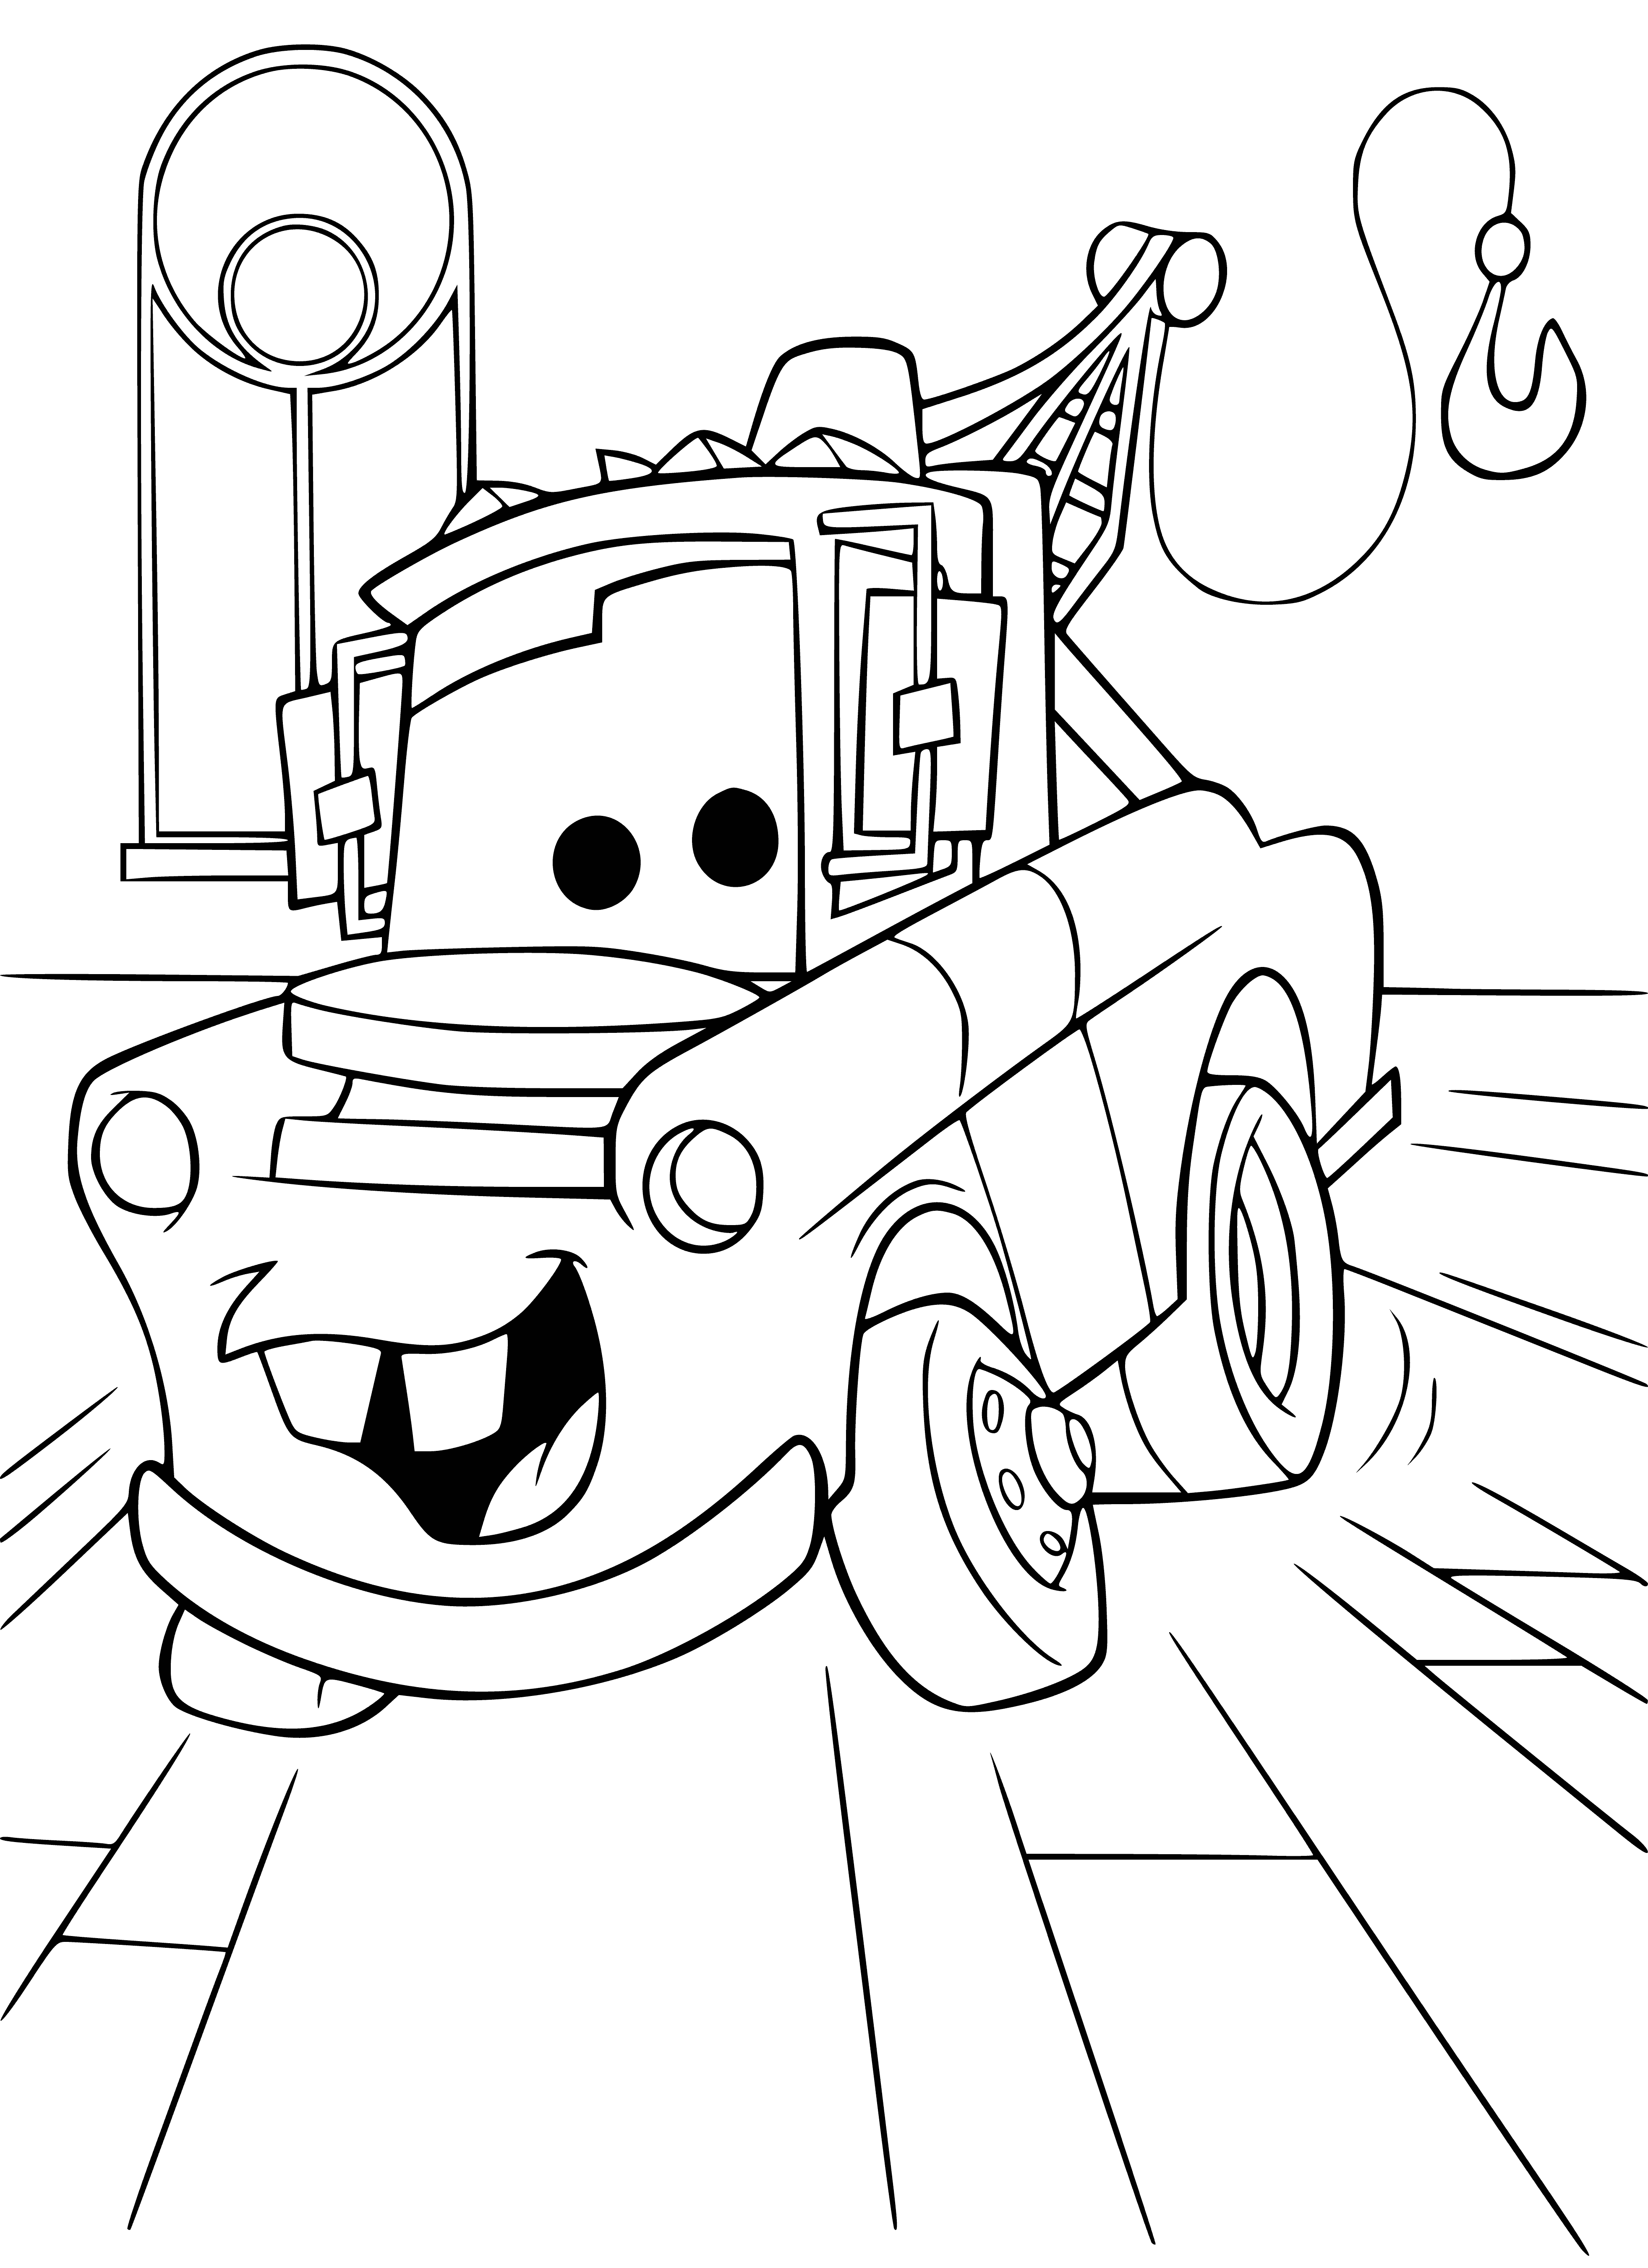 Lightning McQueen's Friend coloring page